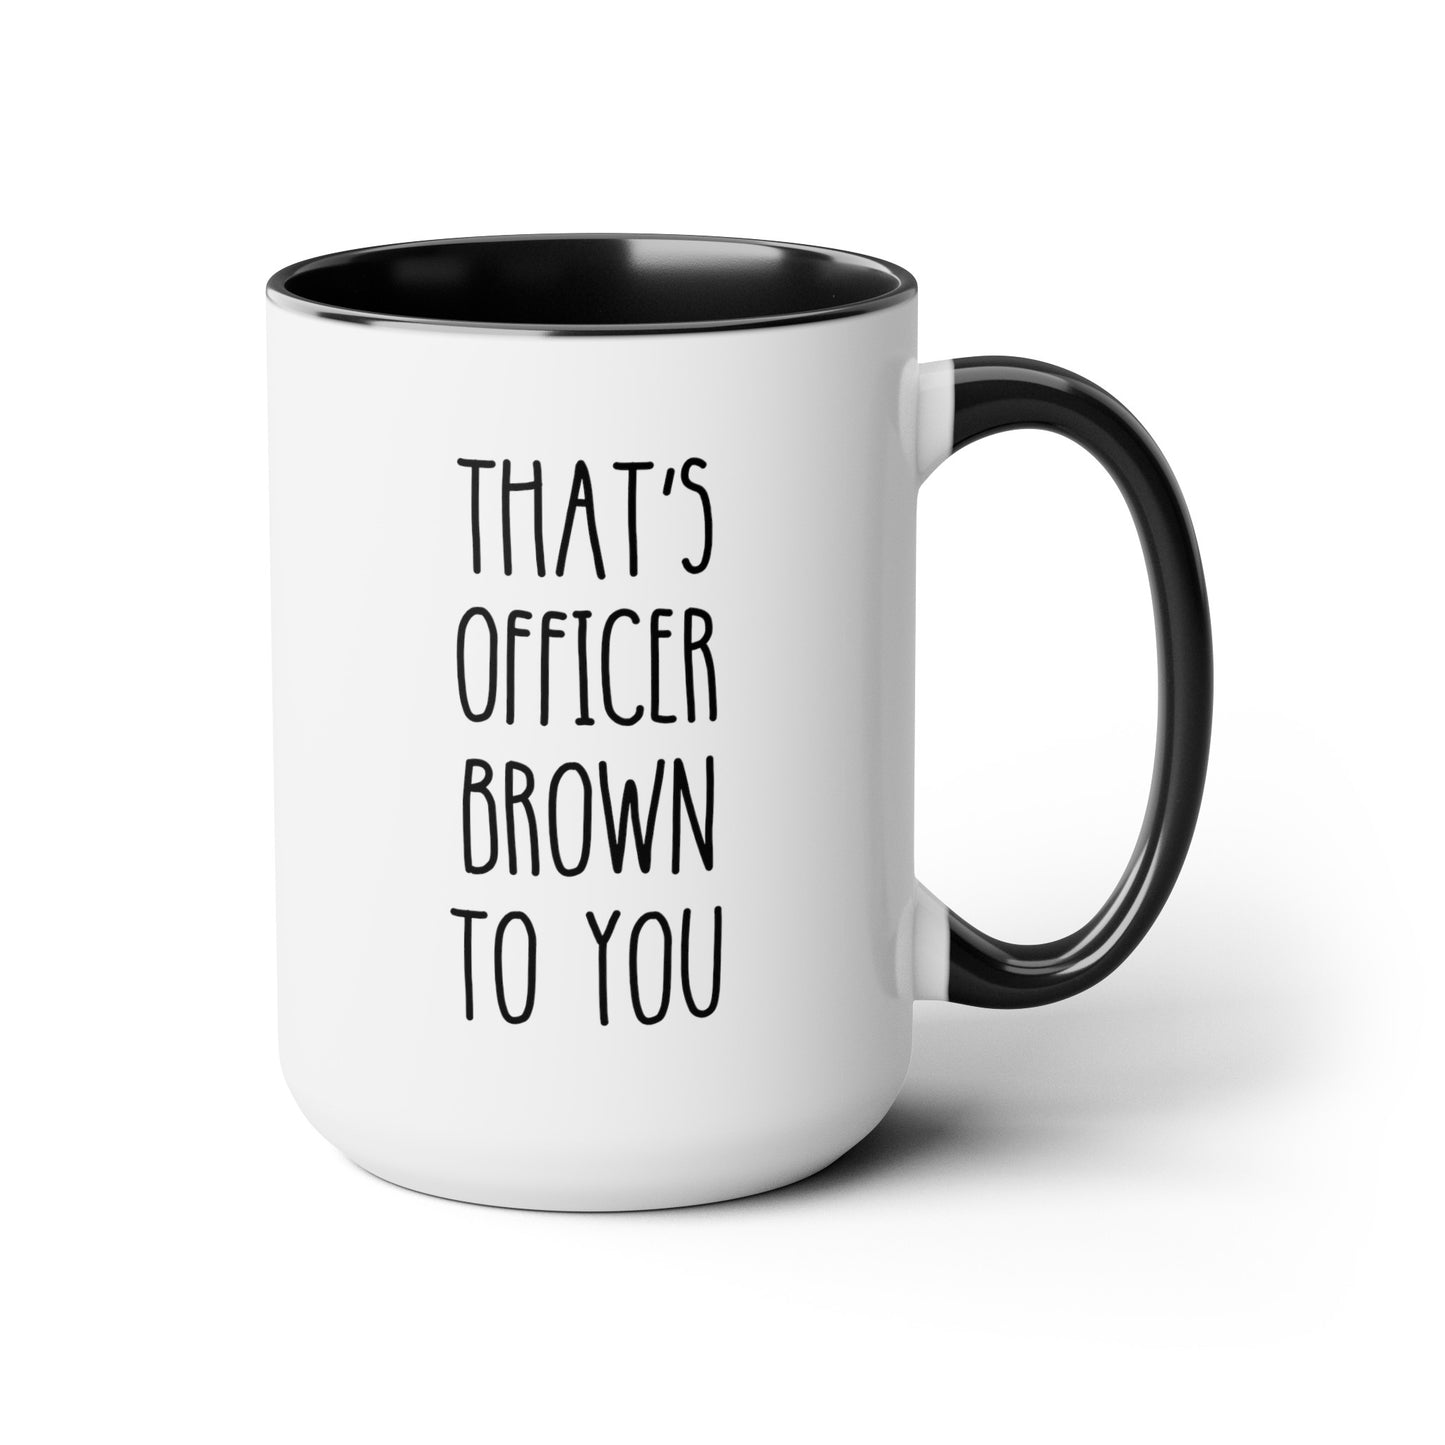 That's Officer To You 15oz white with black accent funny large coffee mug gift for cop police sergeant custom name appreciation personalize policeman promotion waveywares wavey wares wavywares wavy wares